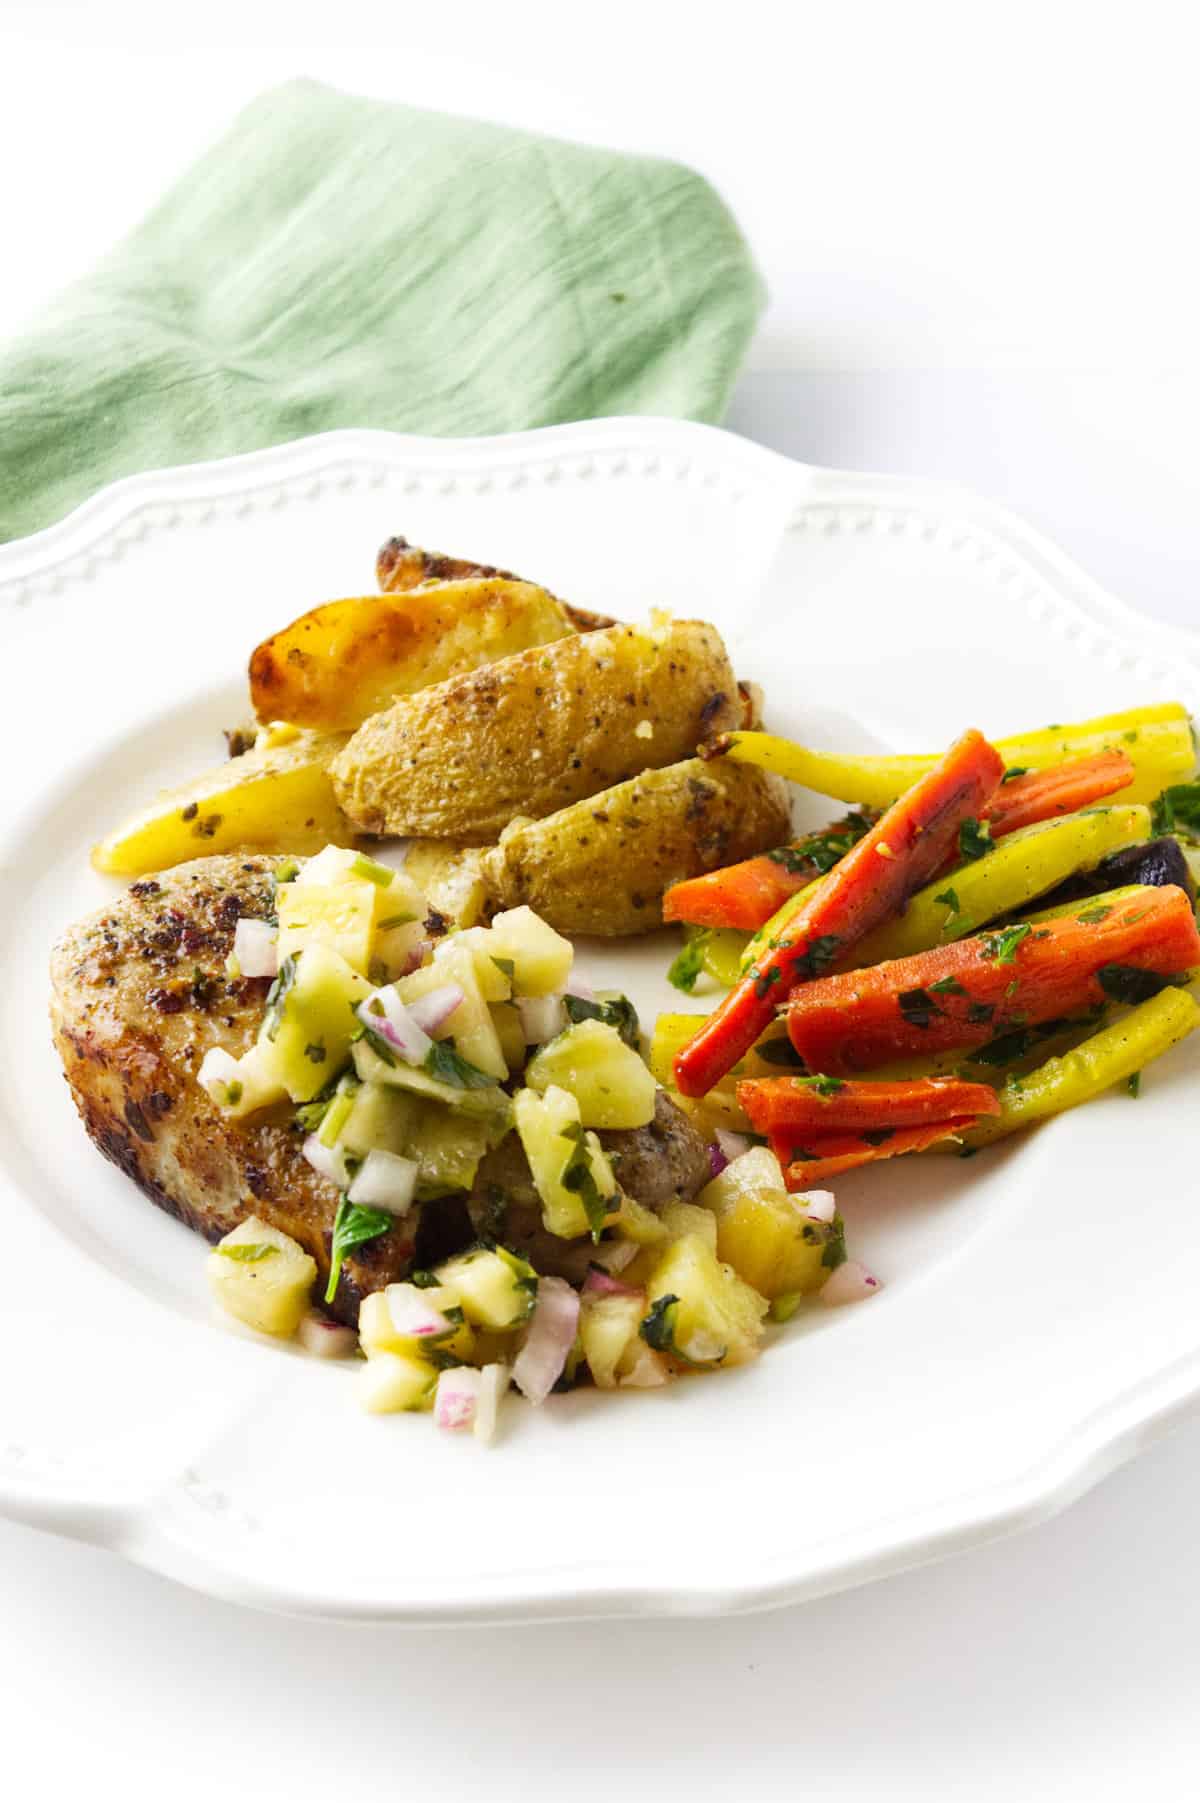 plate with grilled porkchop, pineapple salsa, roasted carrots, roasted yukon potatoes.